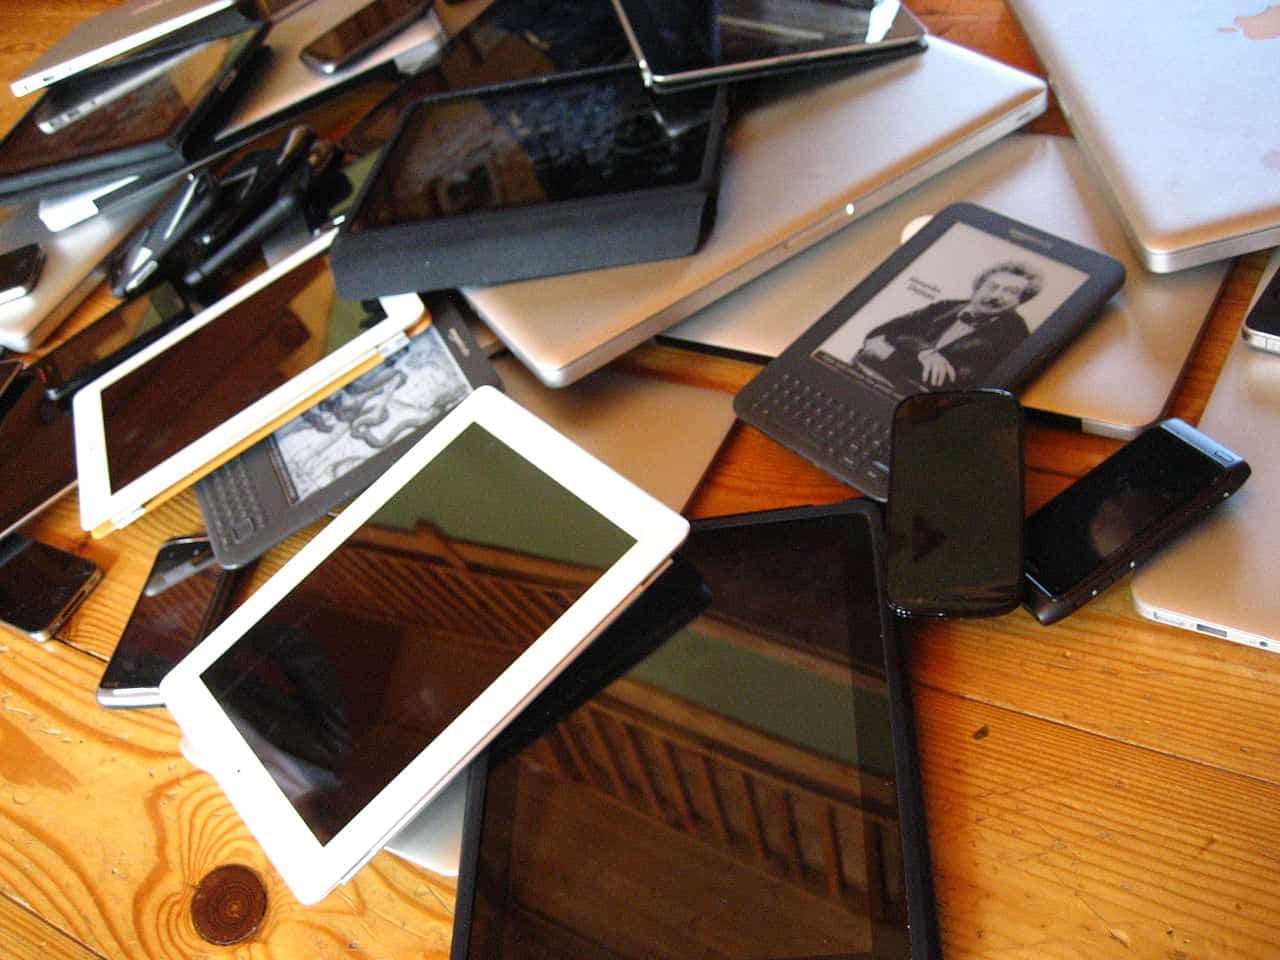 A pile of mobile devices including smart phones, tablets, laptops and ebook readers.